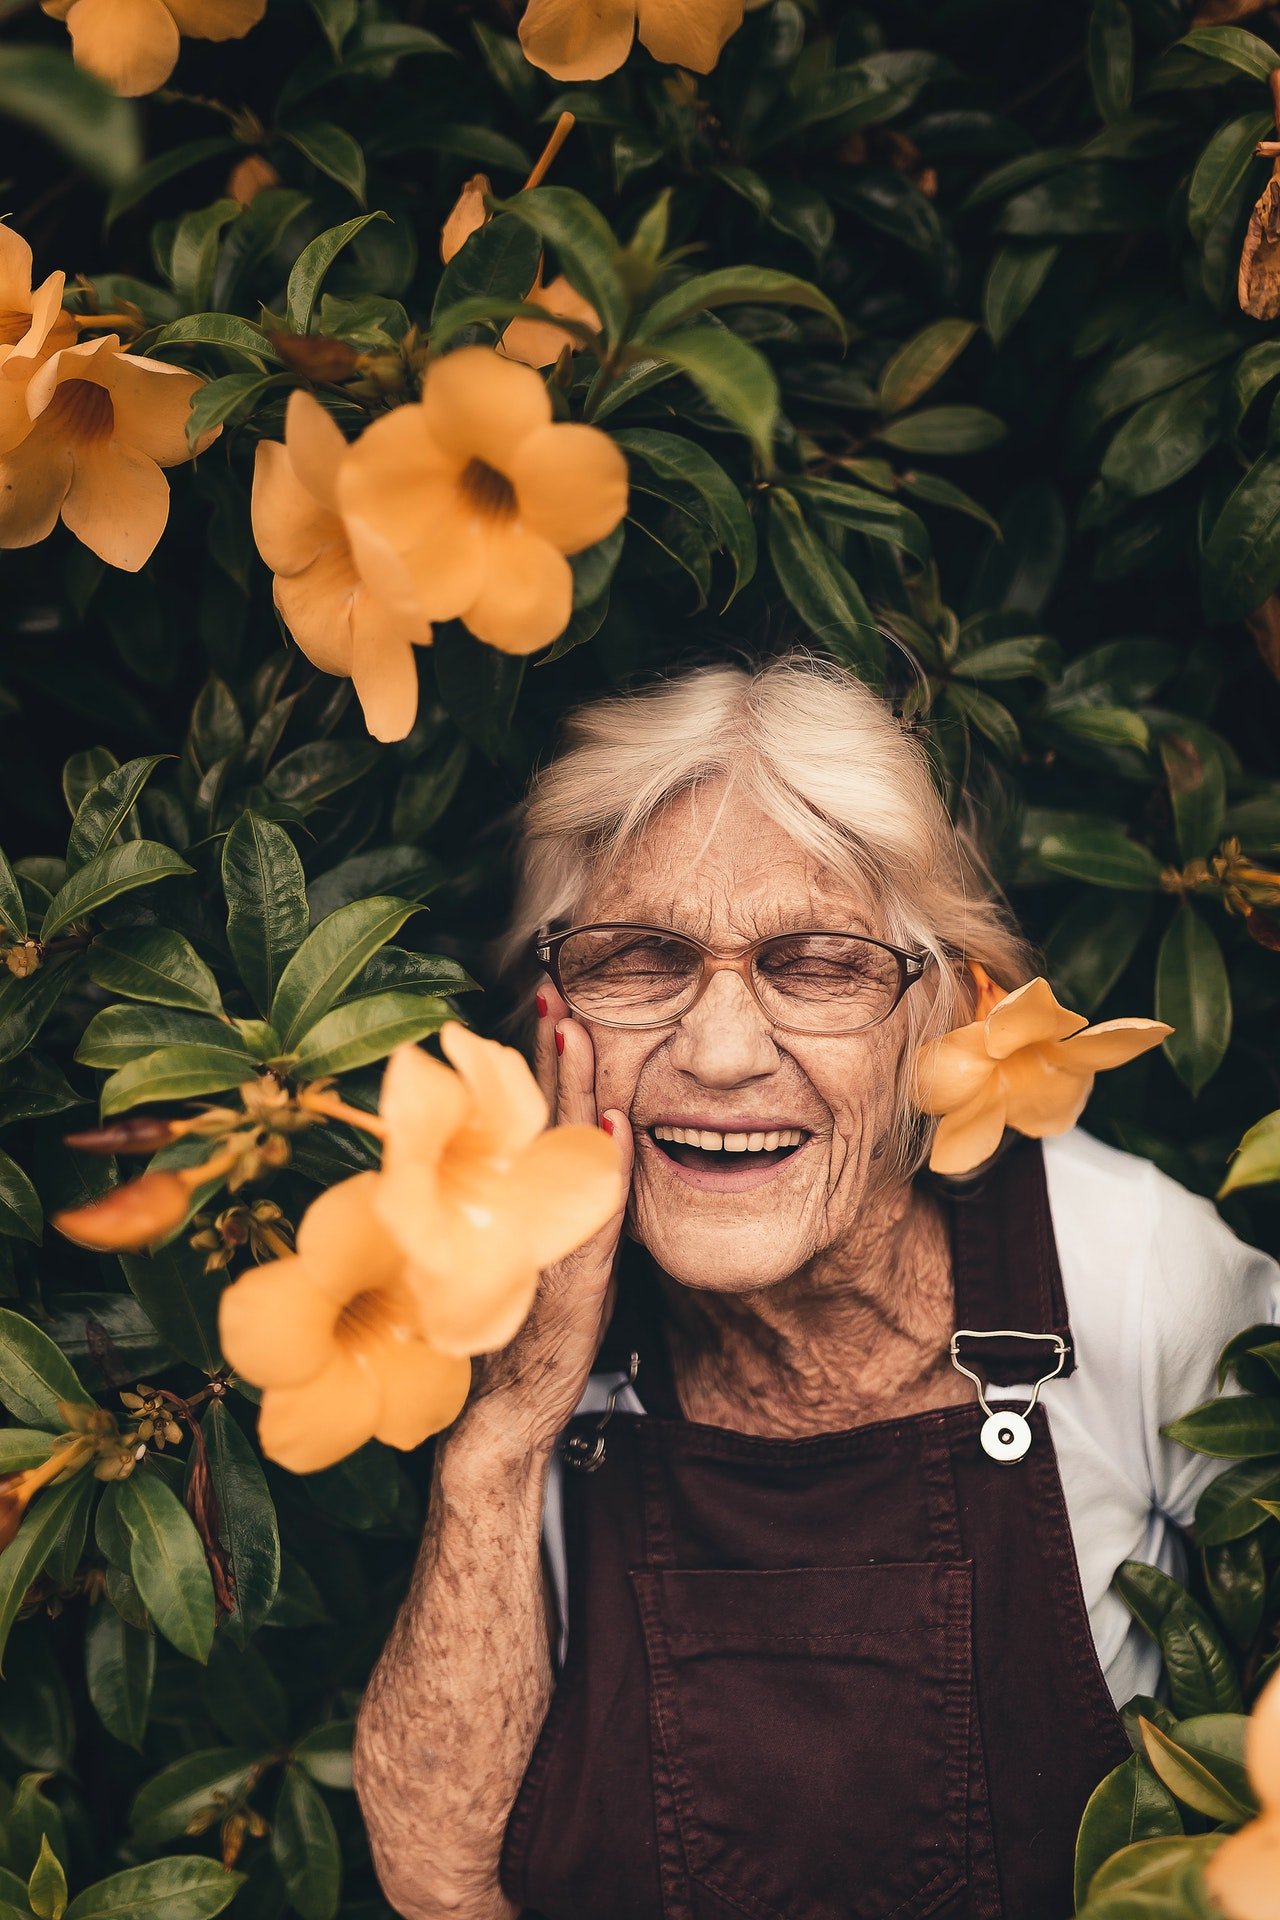 Photo of a woman smiling in the garden | Photo: Pexels